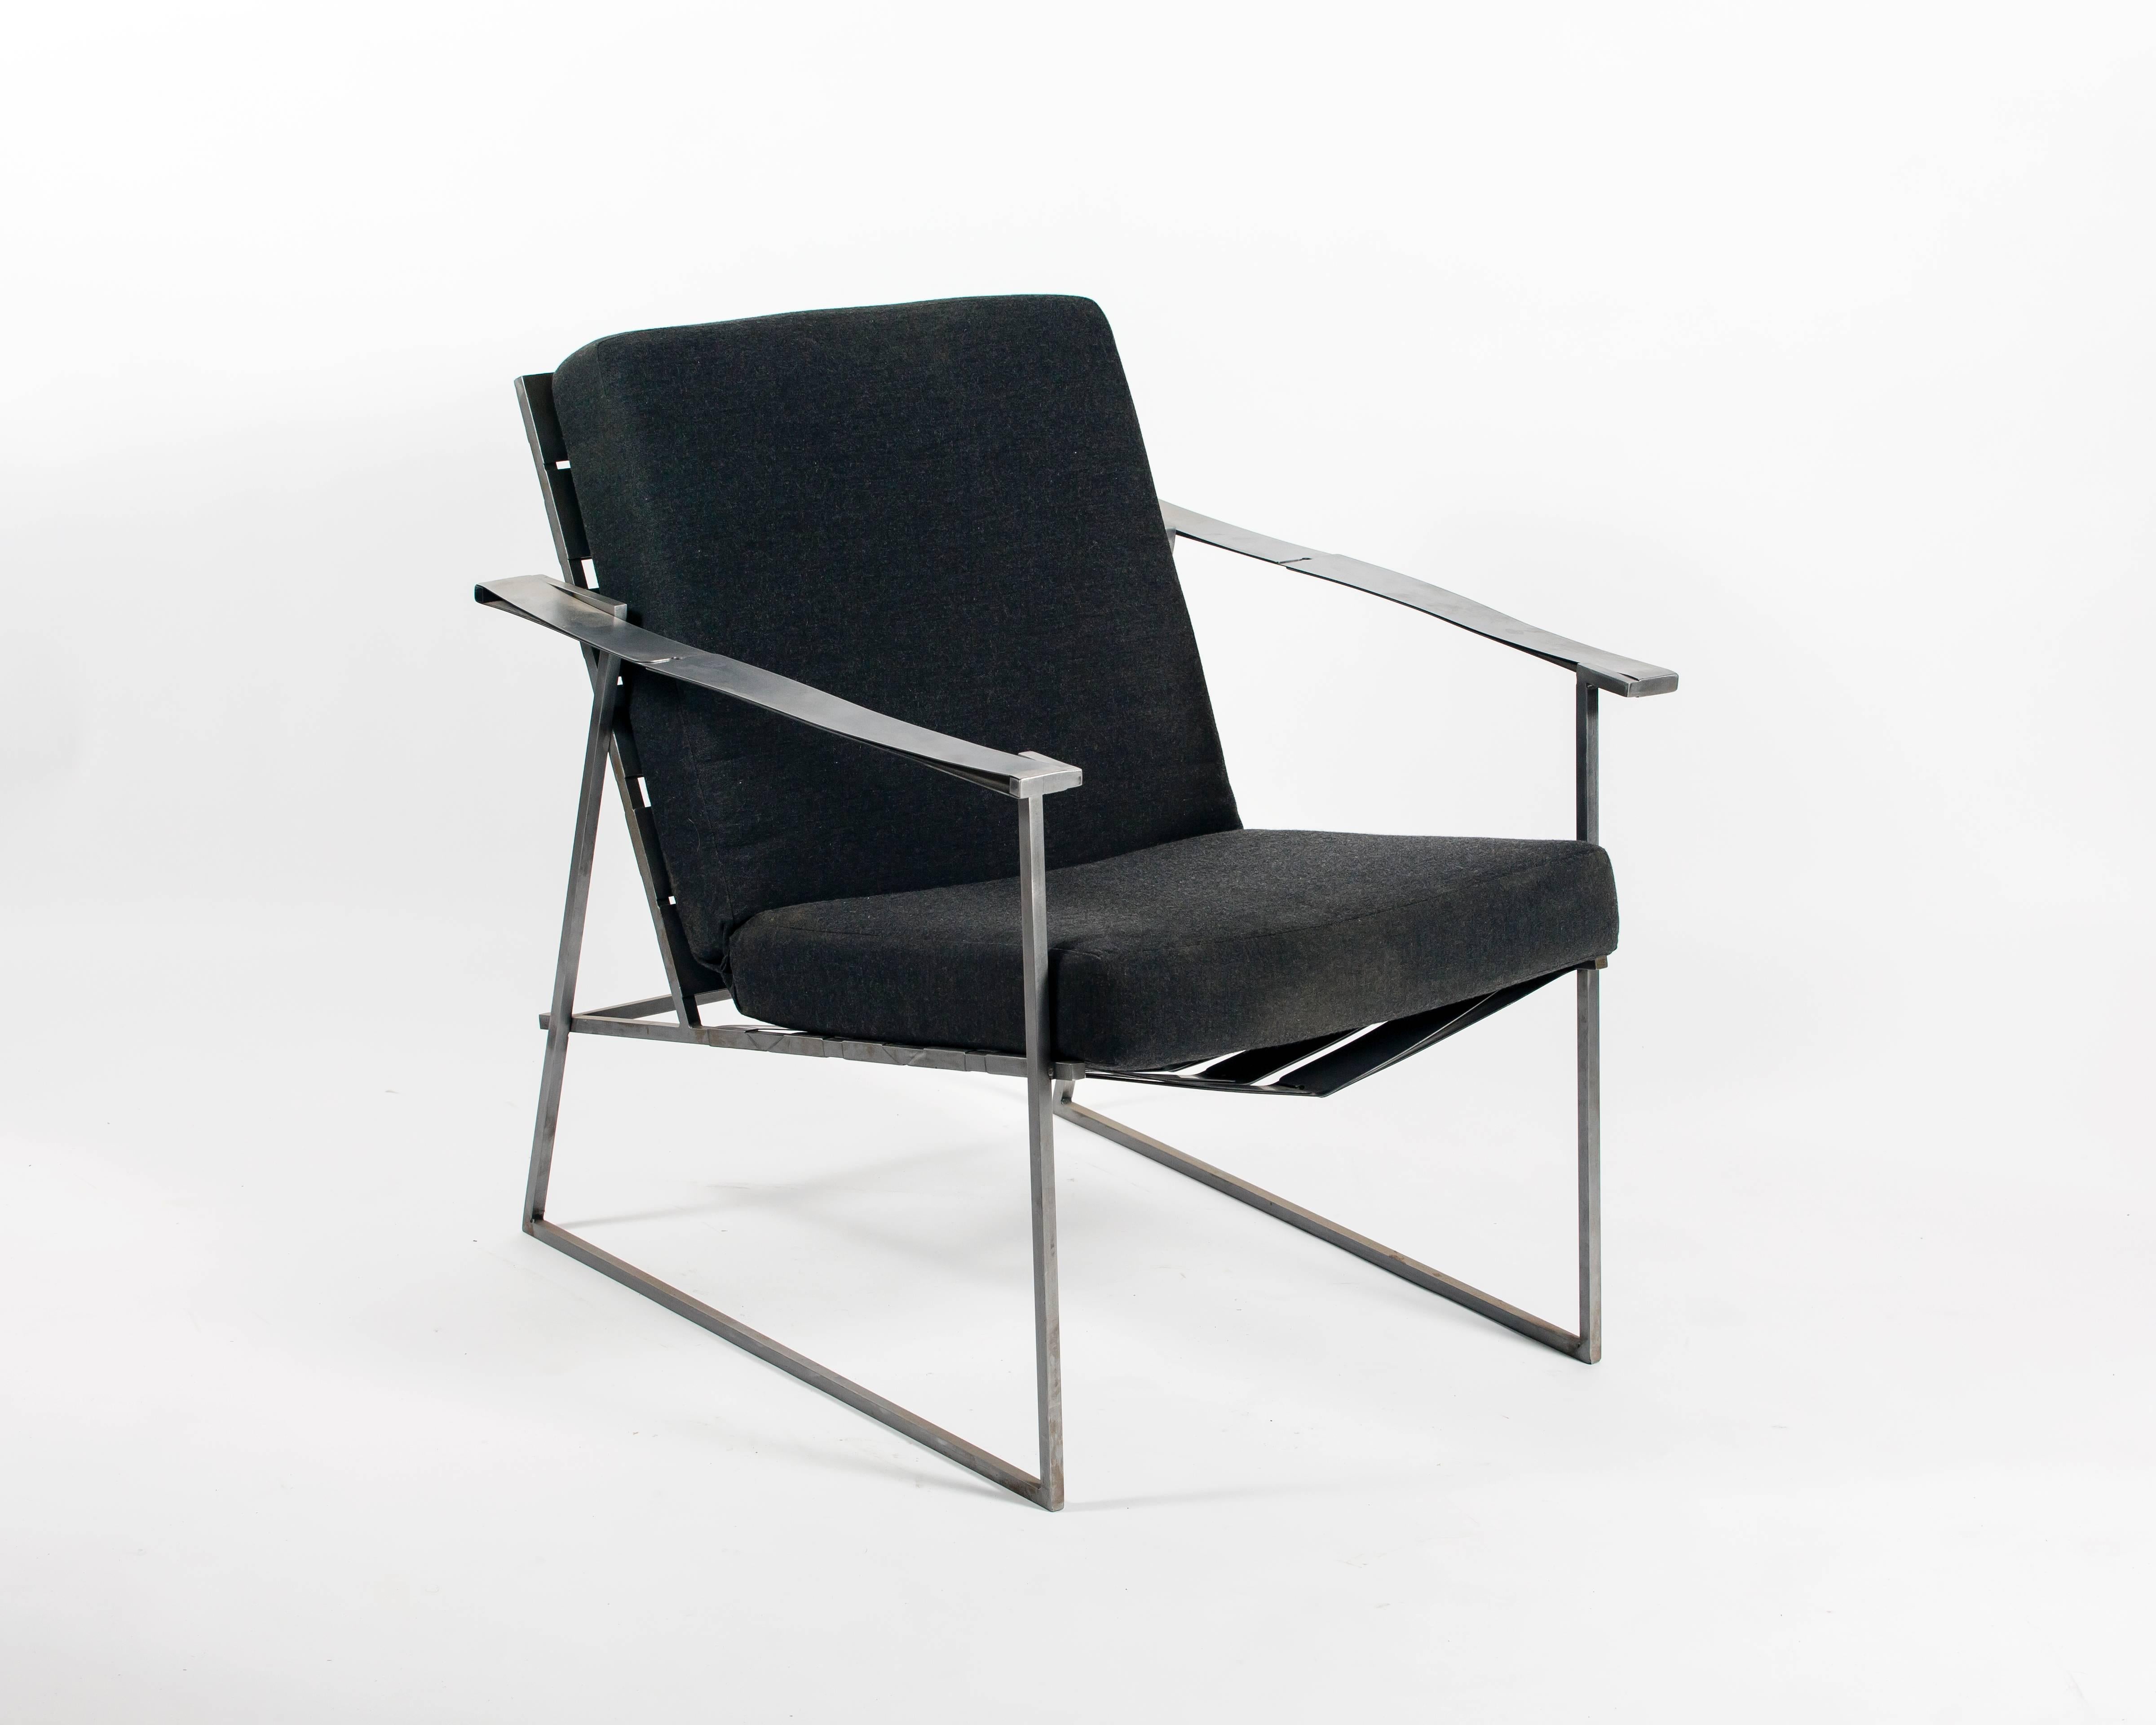 American Contemporary All Steel Chair with Cushions